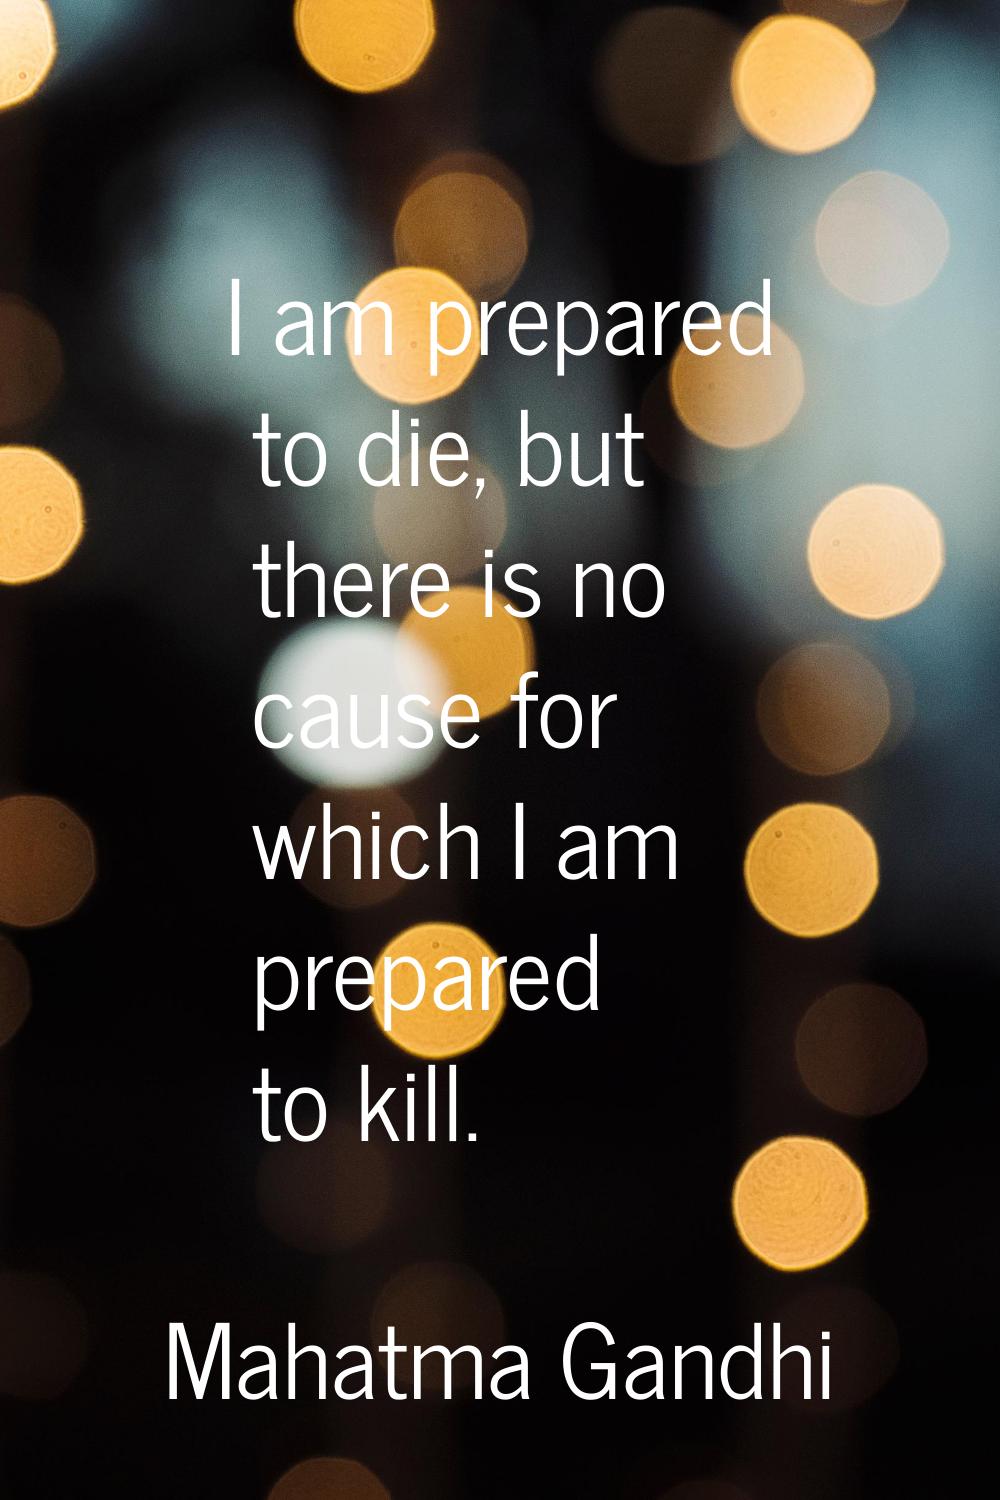 I am prepared to die, but there is no cause for which I am prepared to kill.